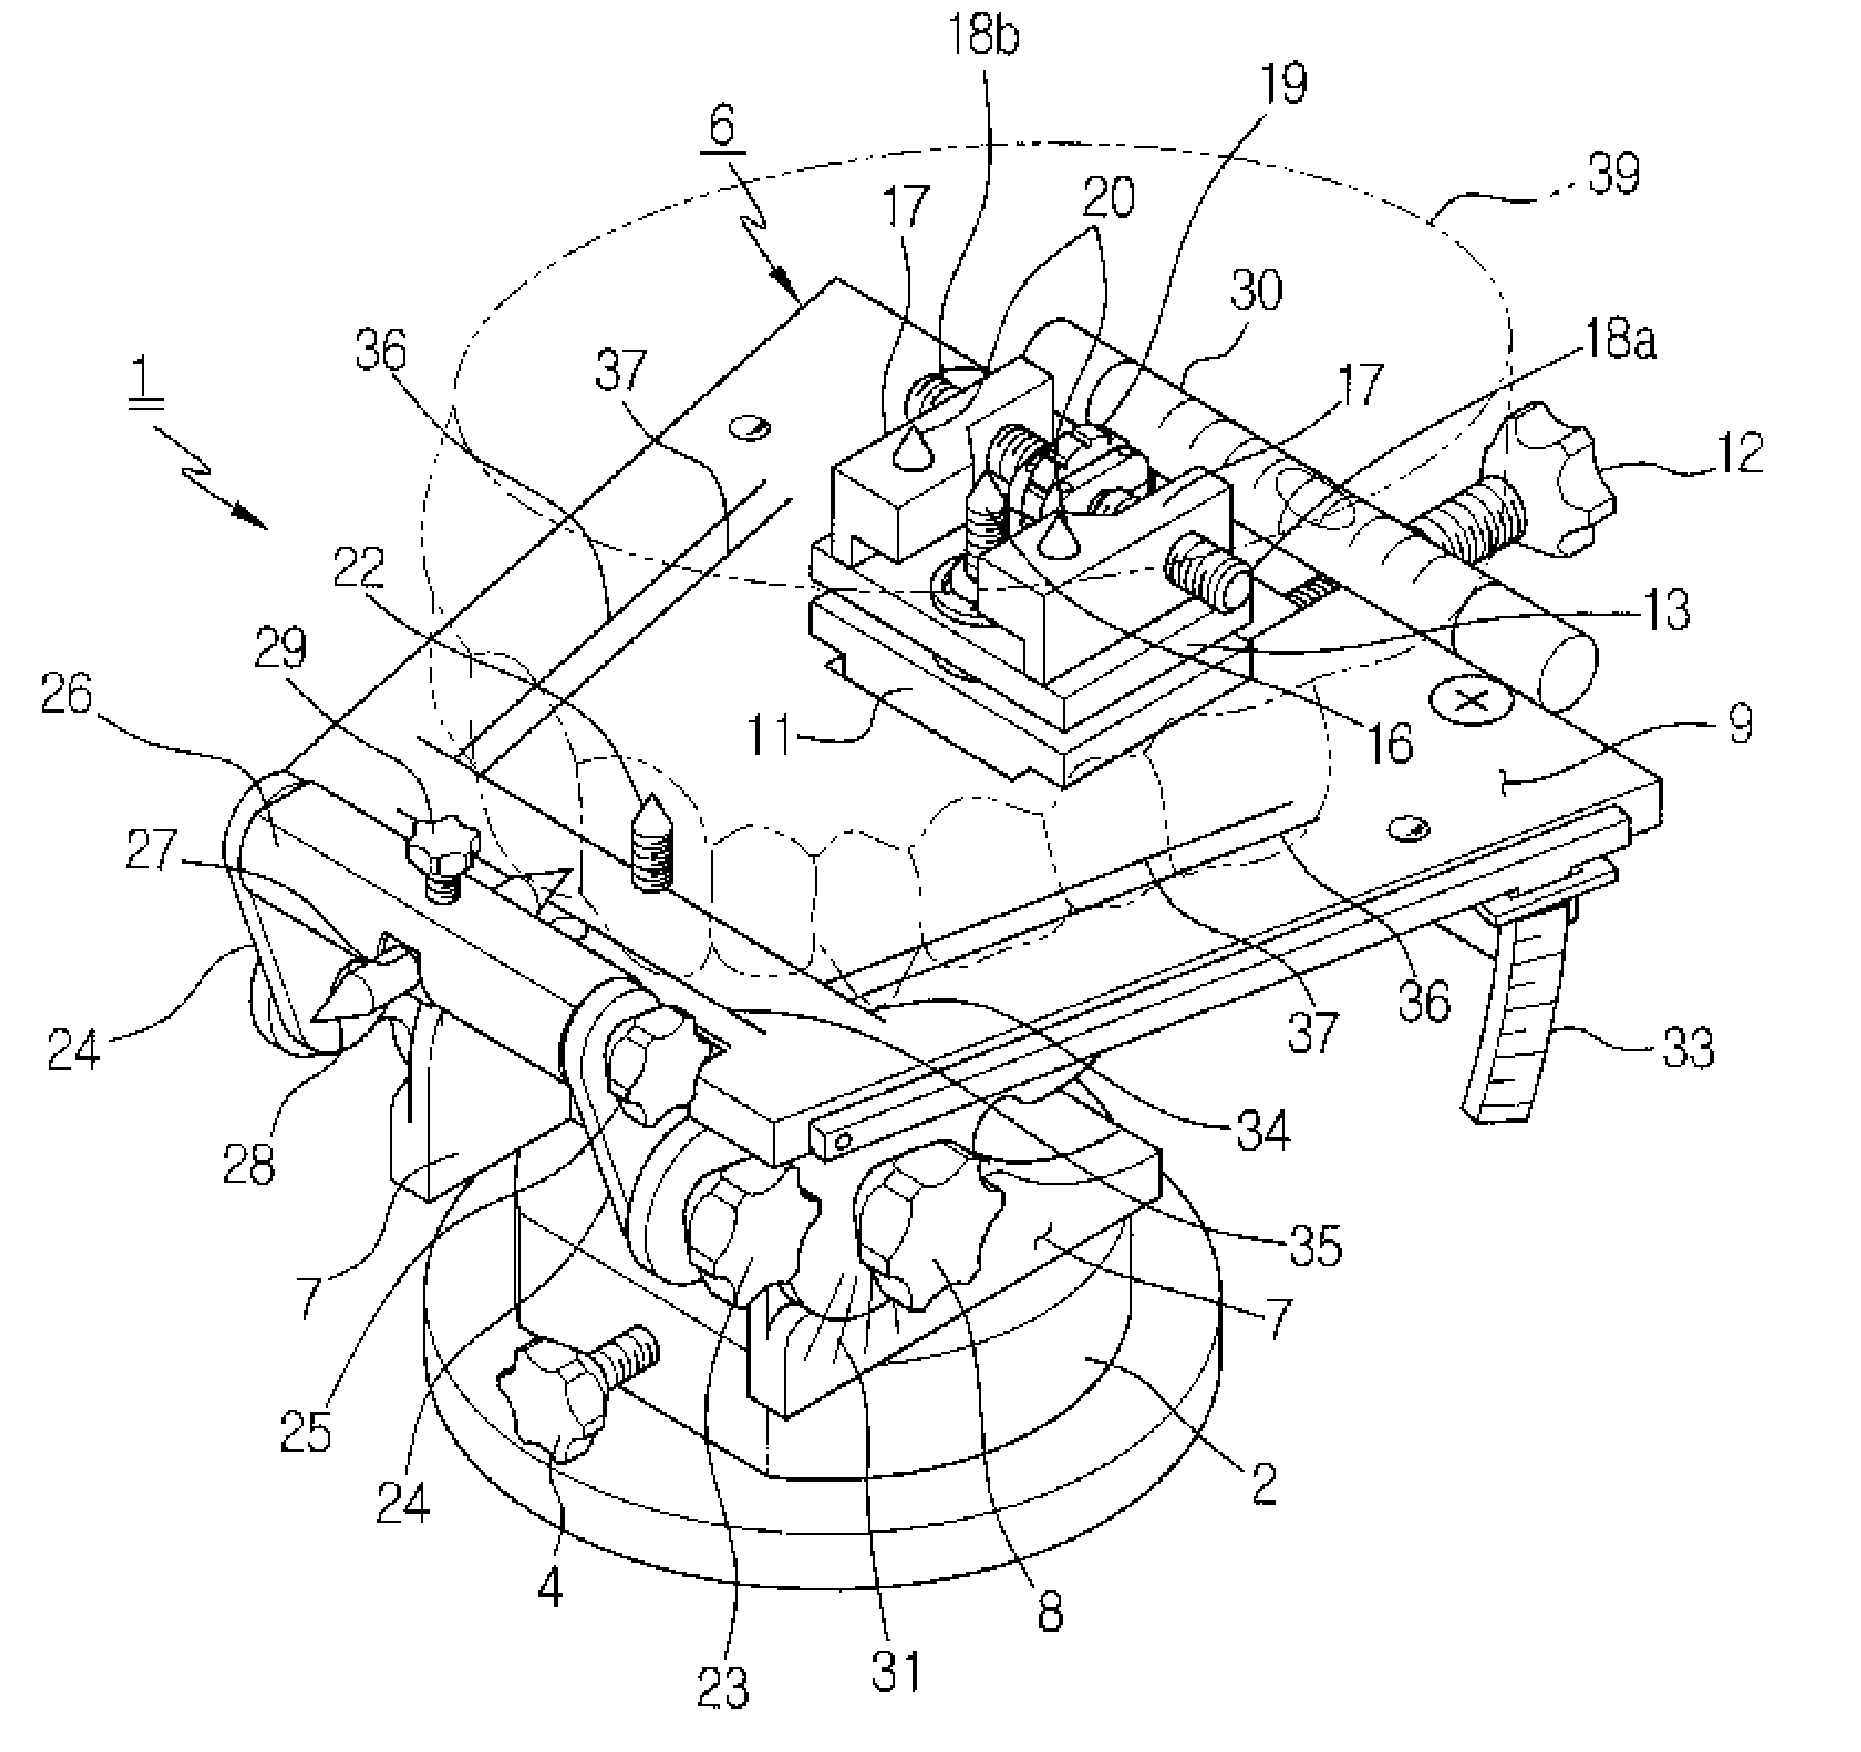 Device for attaching dental model to articulator